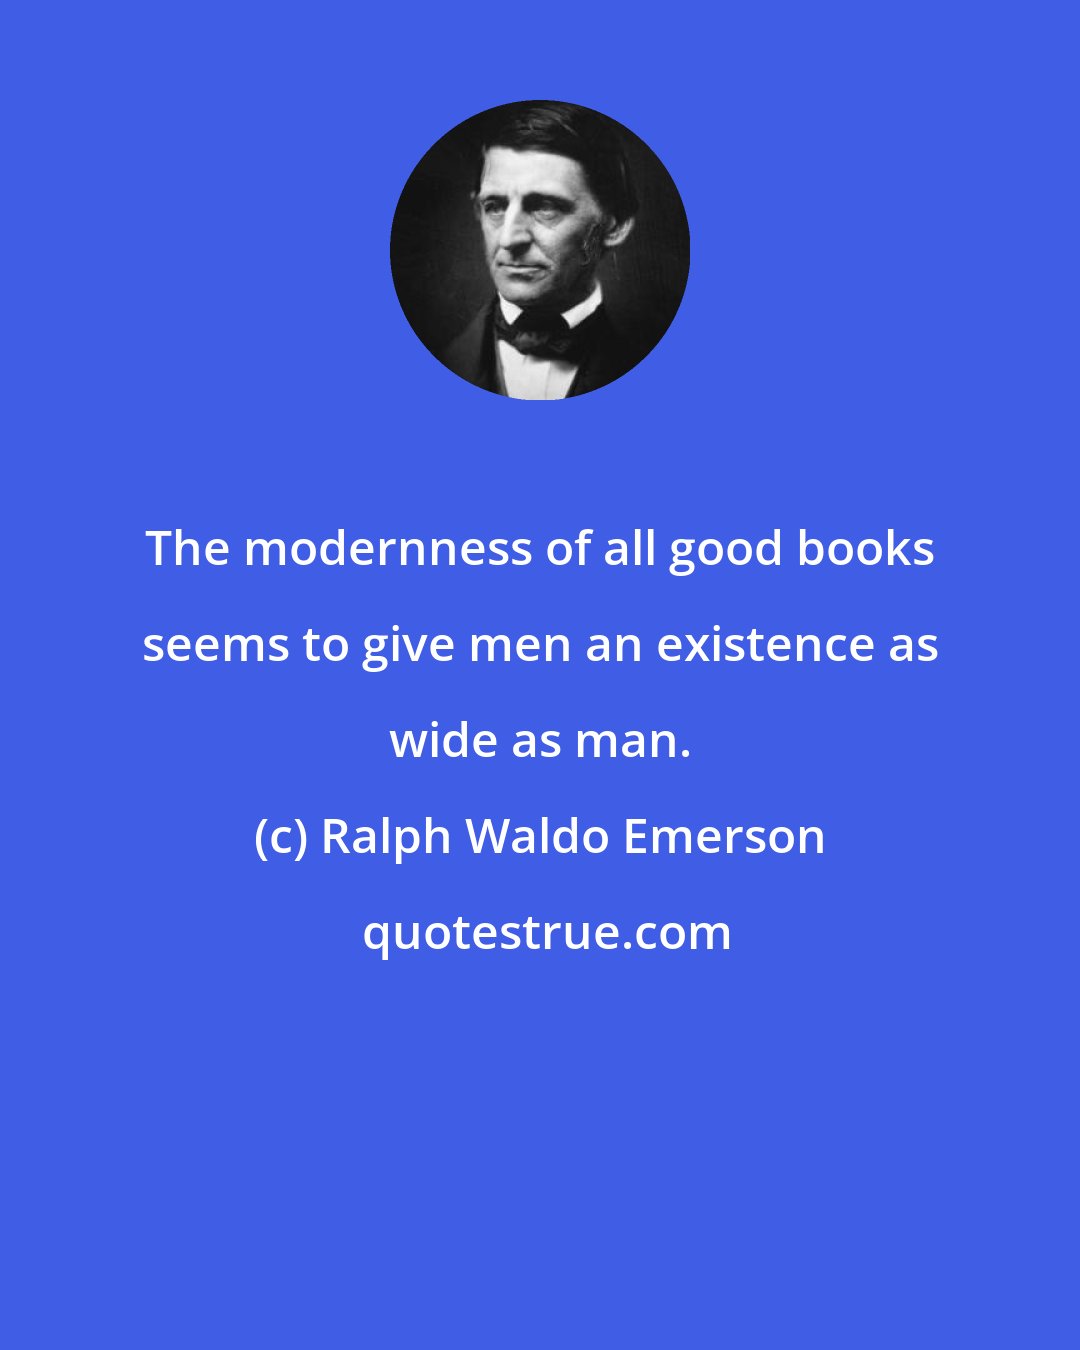 Ralph Waldo Emerson: The modernness of all good books seems to give men an existence as wide as man.